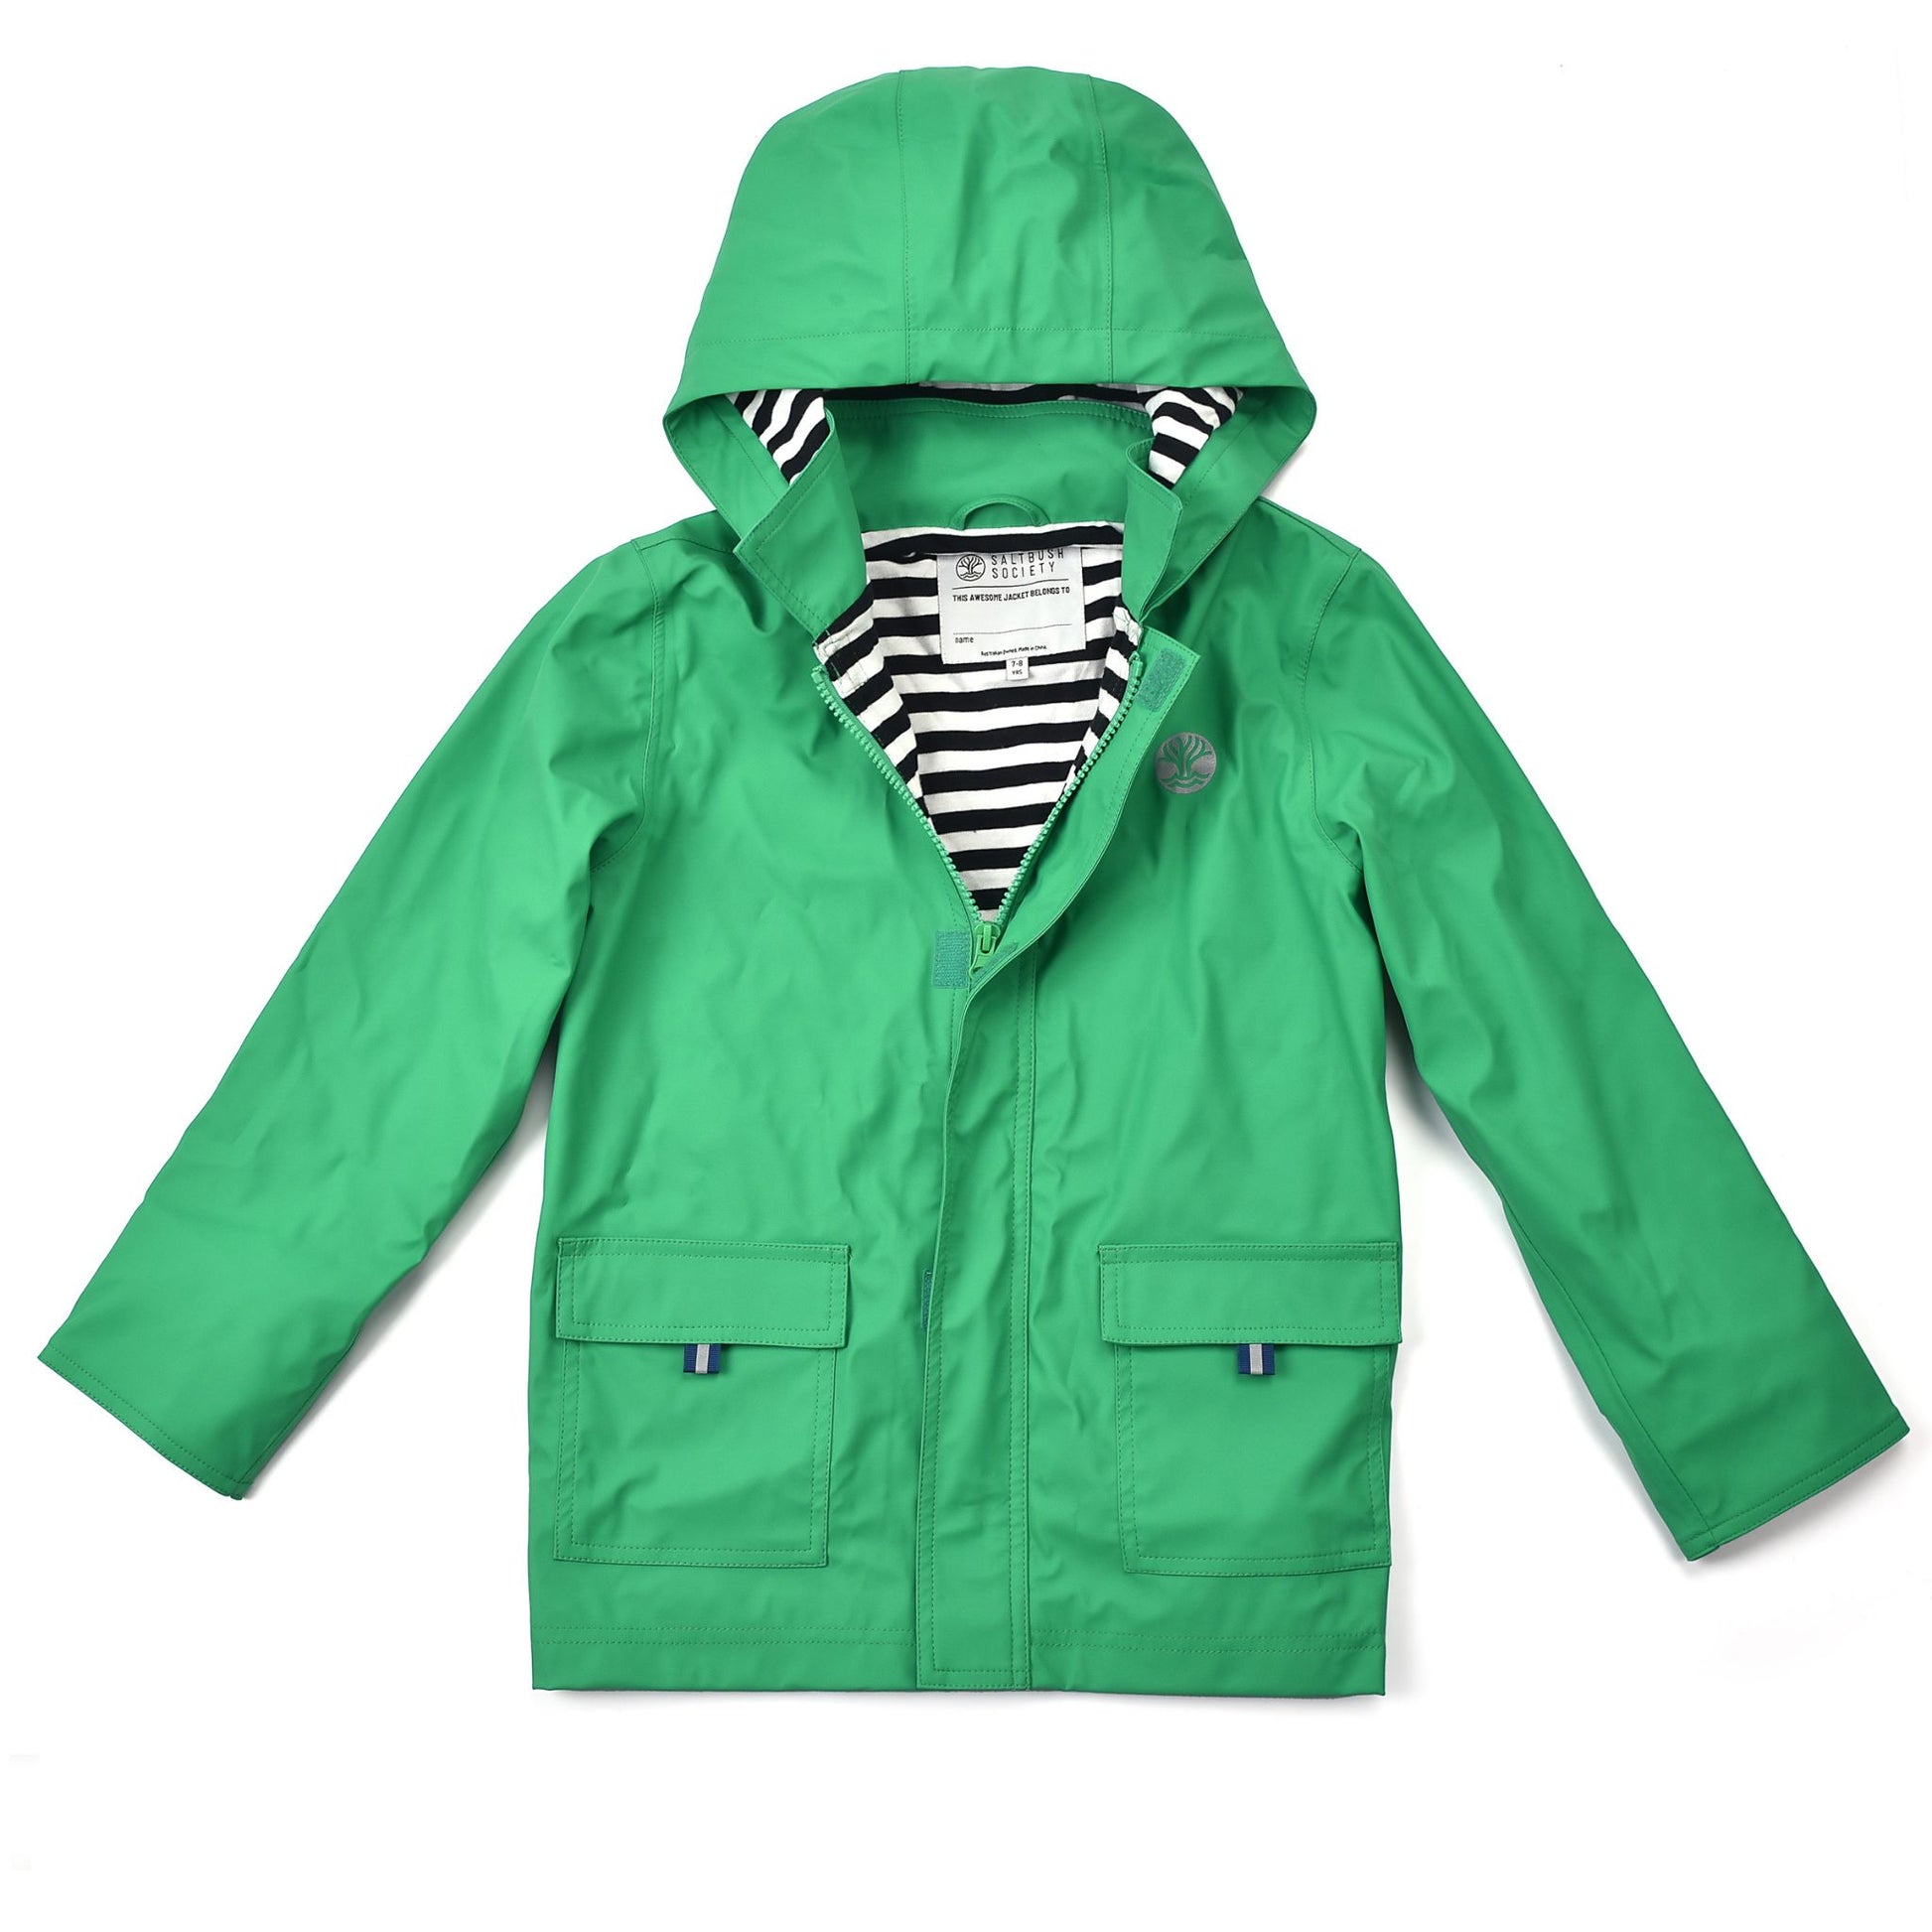 The front of a Green Raincoat with stripy lining